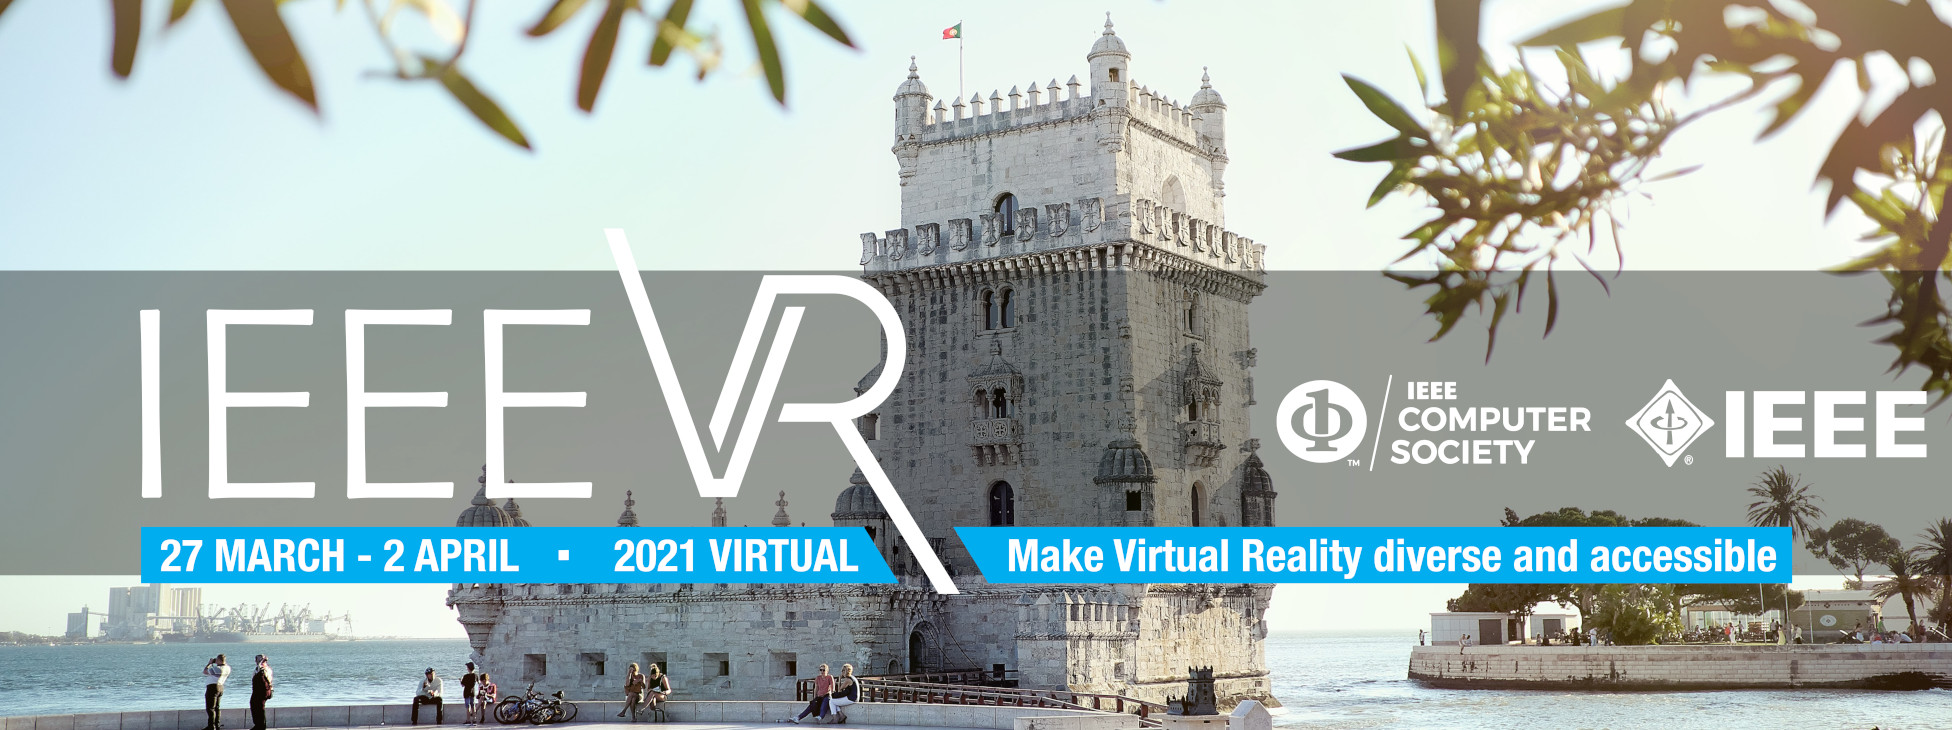 Image of the Belem Tower in Lisbon along with a view for the Tagus river. And the Logo for IEEEVR Lisbon 2021 with the moto: make virtual reality diverse and acessible.